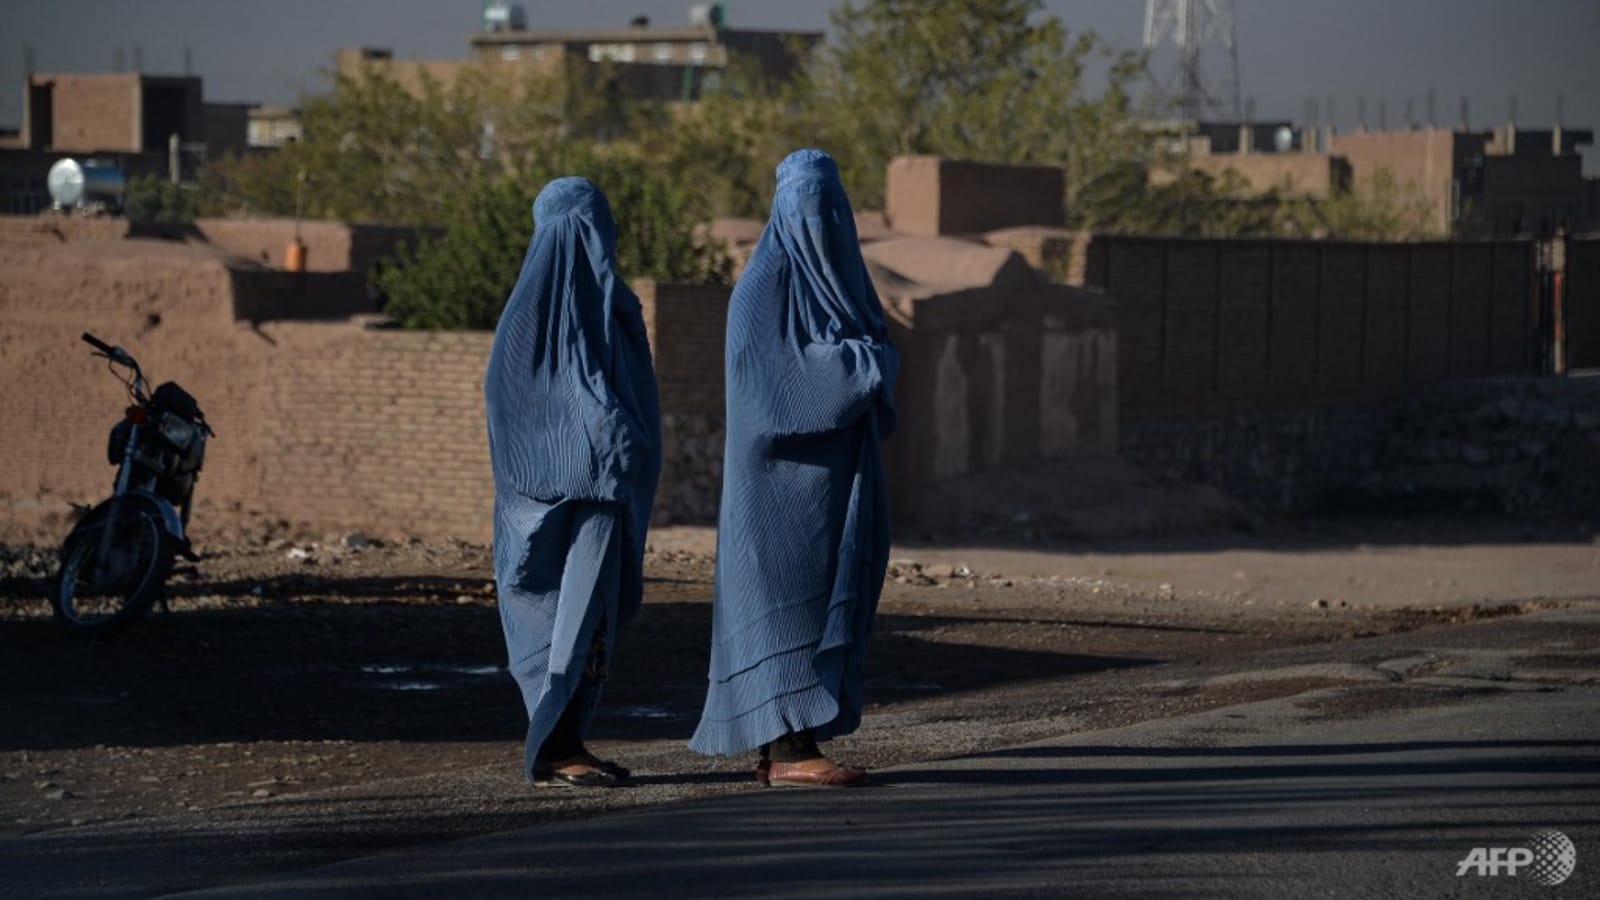 Anxiety and fear for women in Taliban stronghold thumbnail